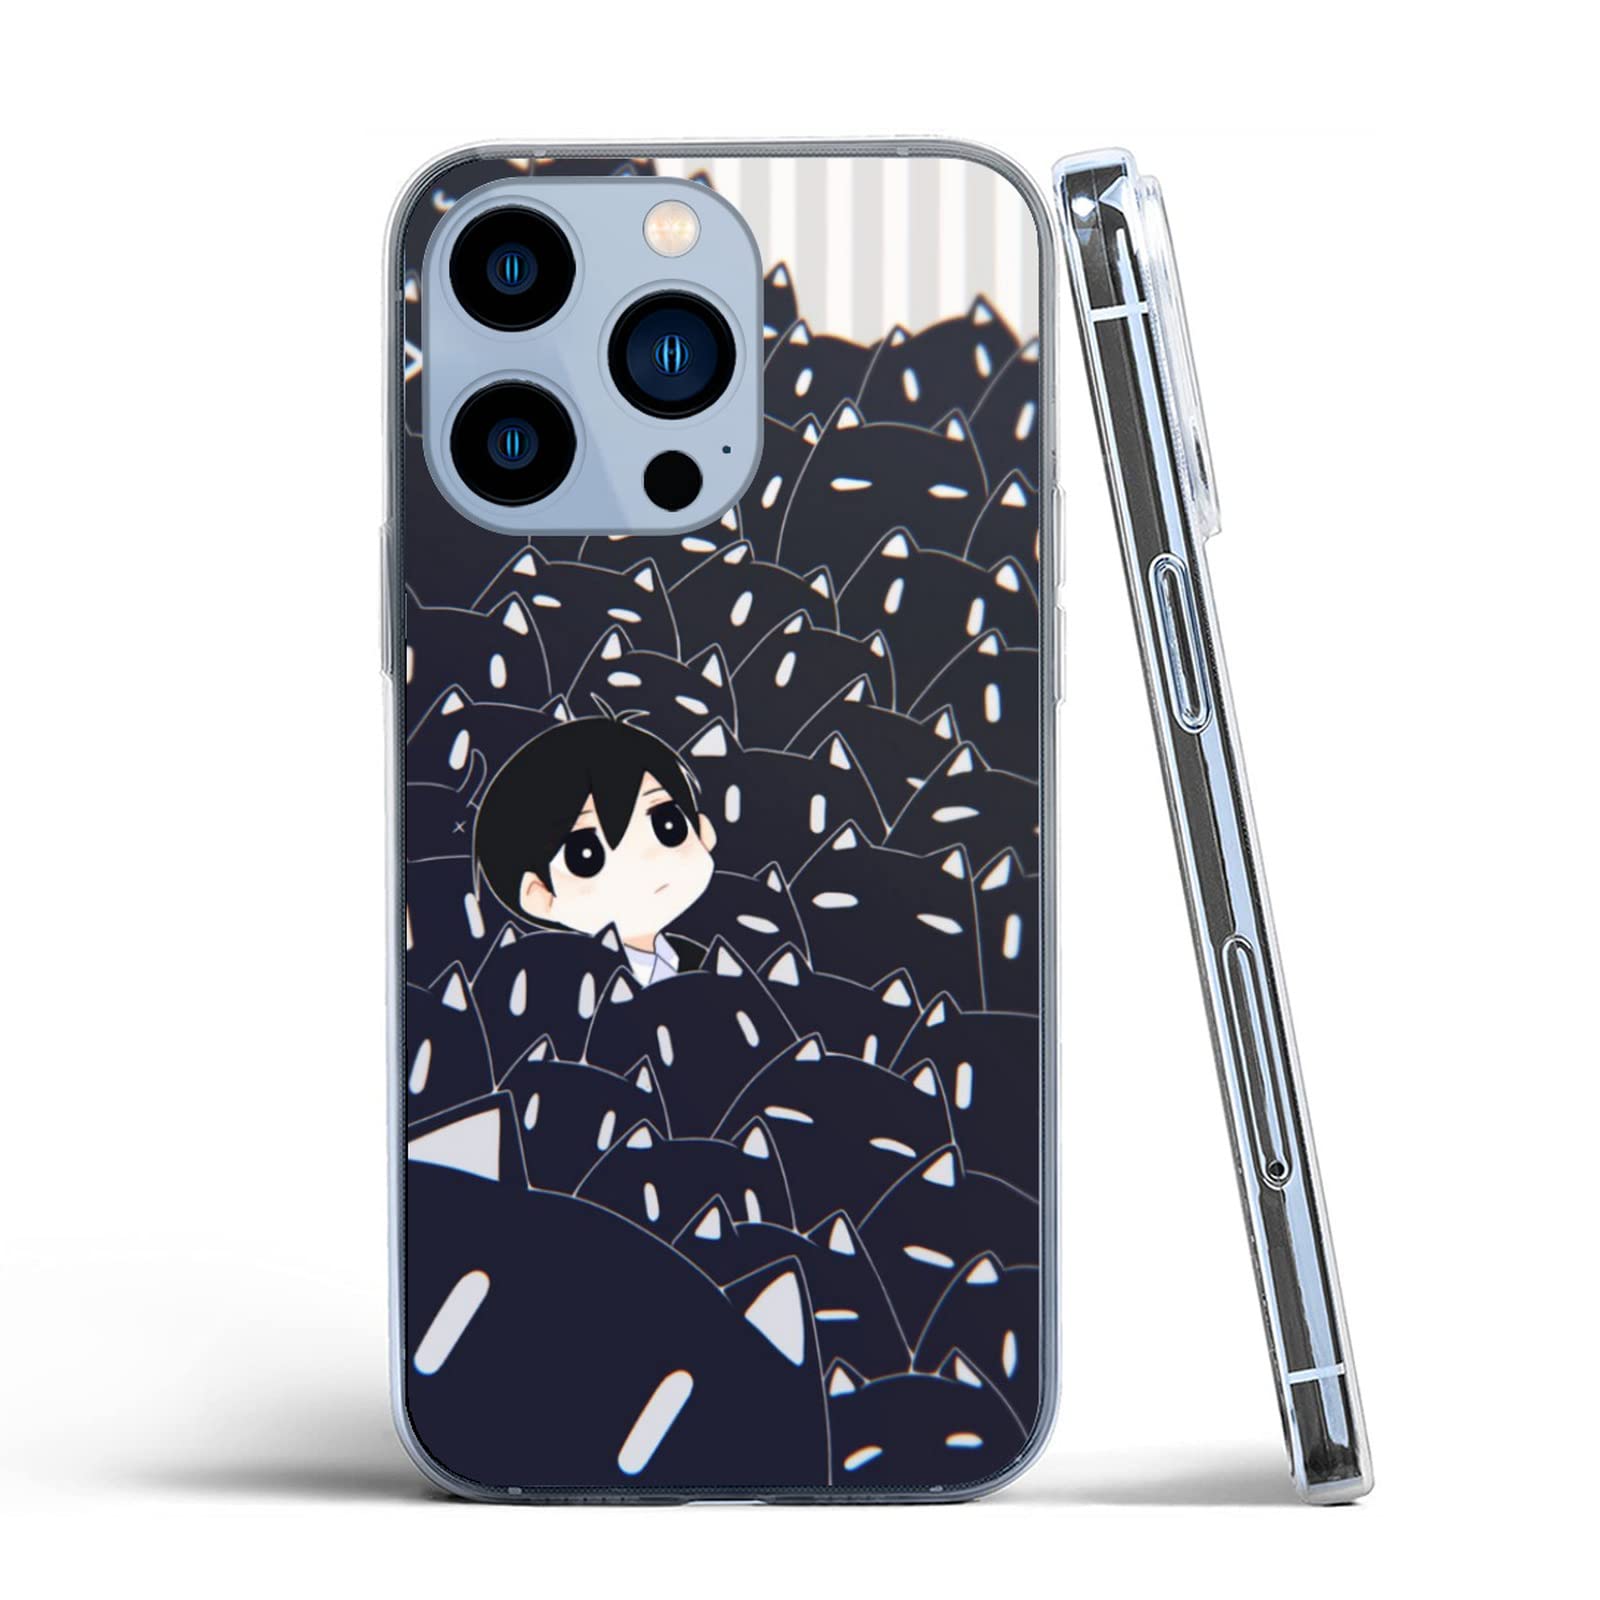 Anime iPhone Cases for Sale | Redbubble